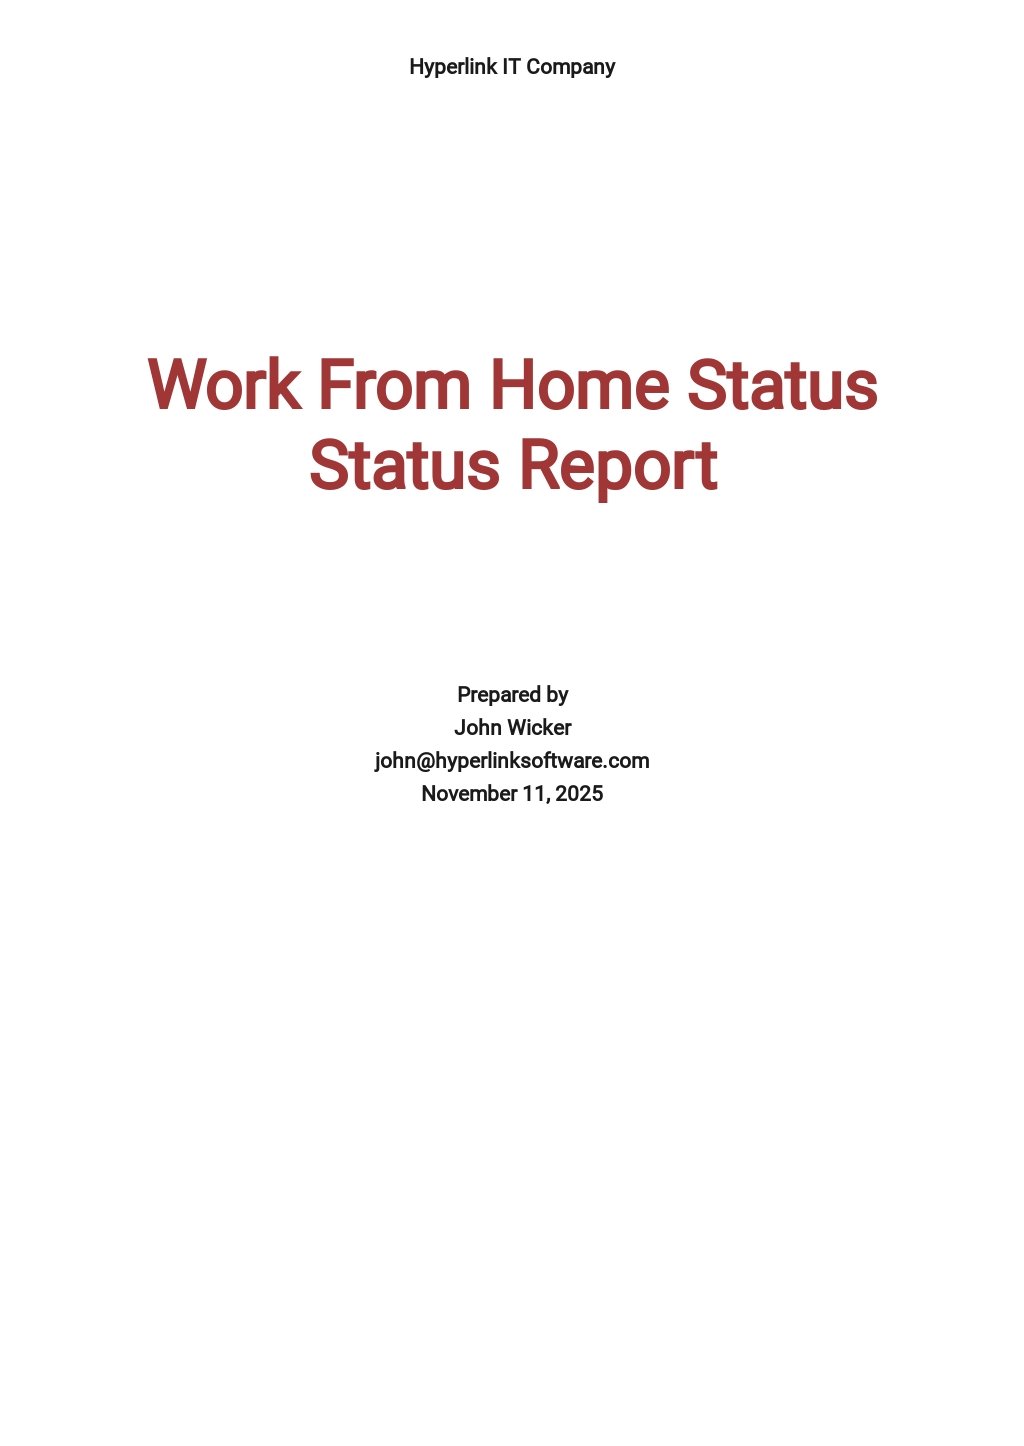 Work From Home Status Report Template.jpe